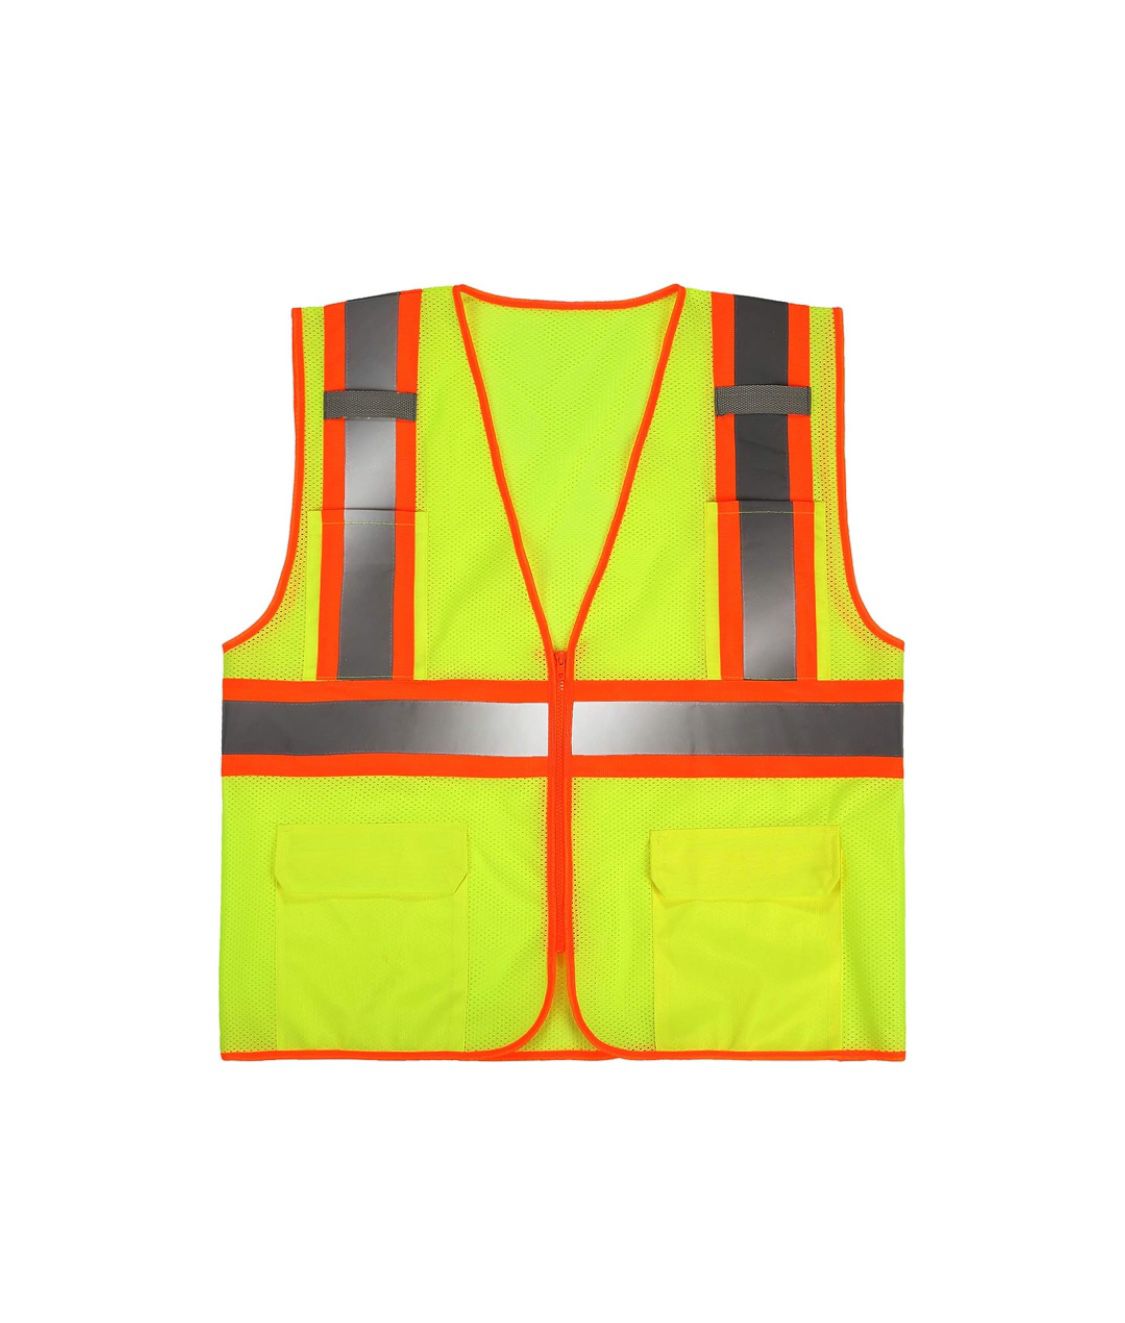 High Visibility Reflective Safety Vest with Zipper and Pockets Yellow,M 